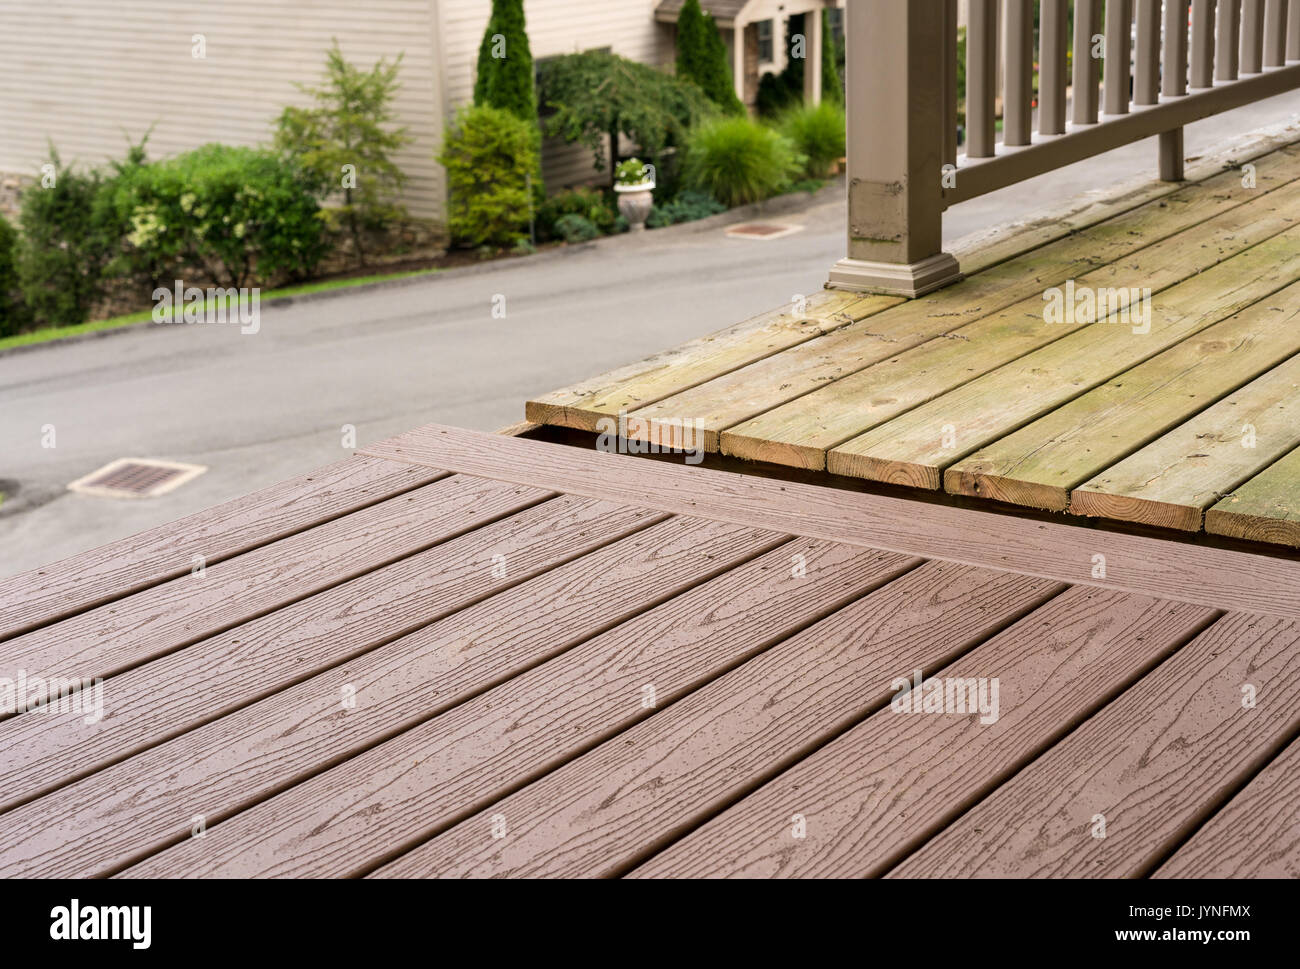 Replacement of old wooden deck with composite material Stock Photo